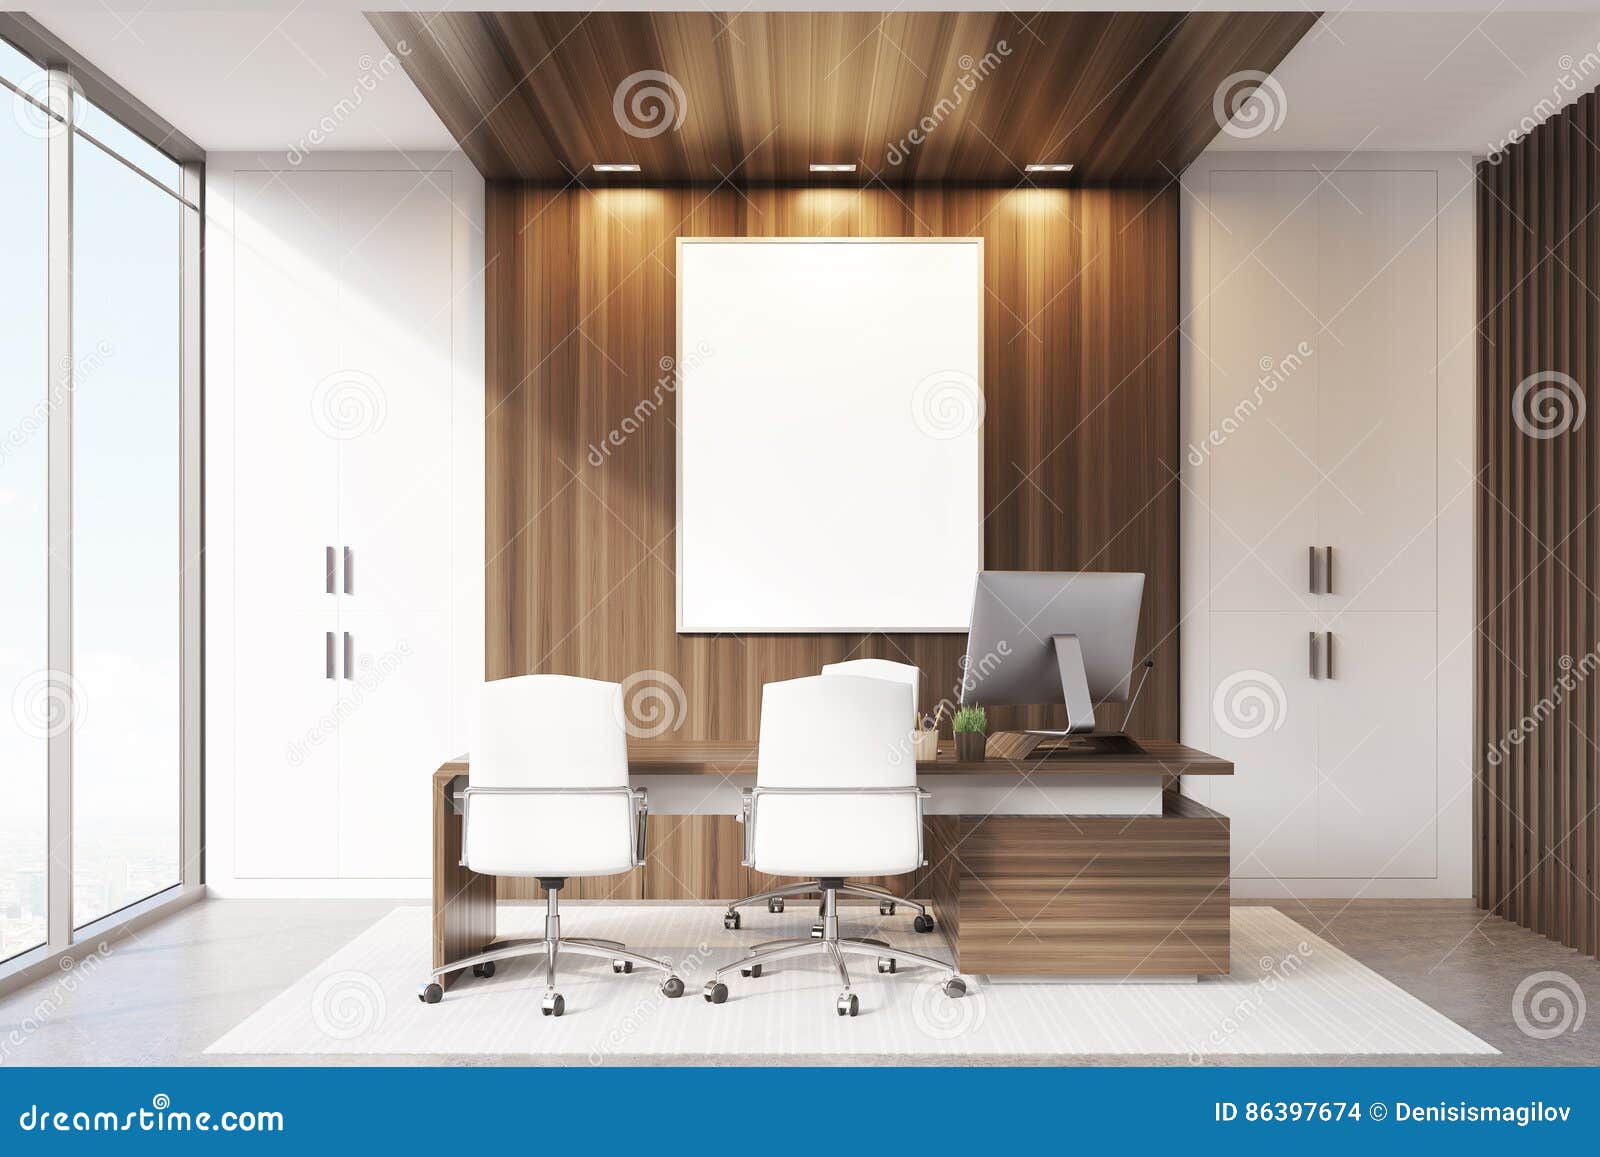 Ceo Office With Wood And Panoramic Windows Stock